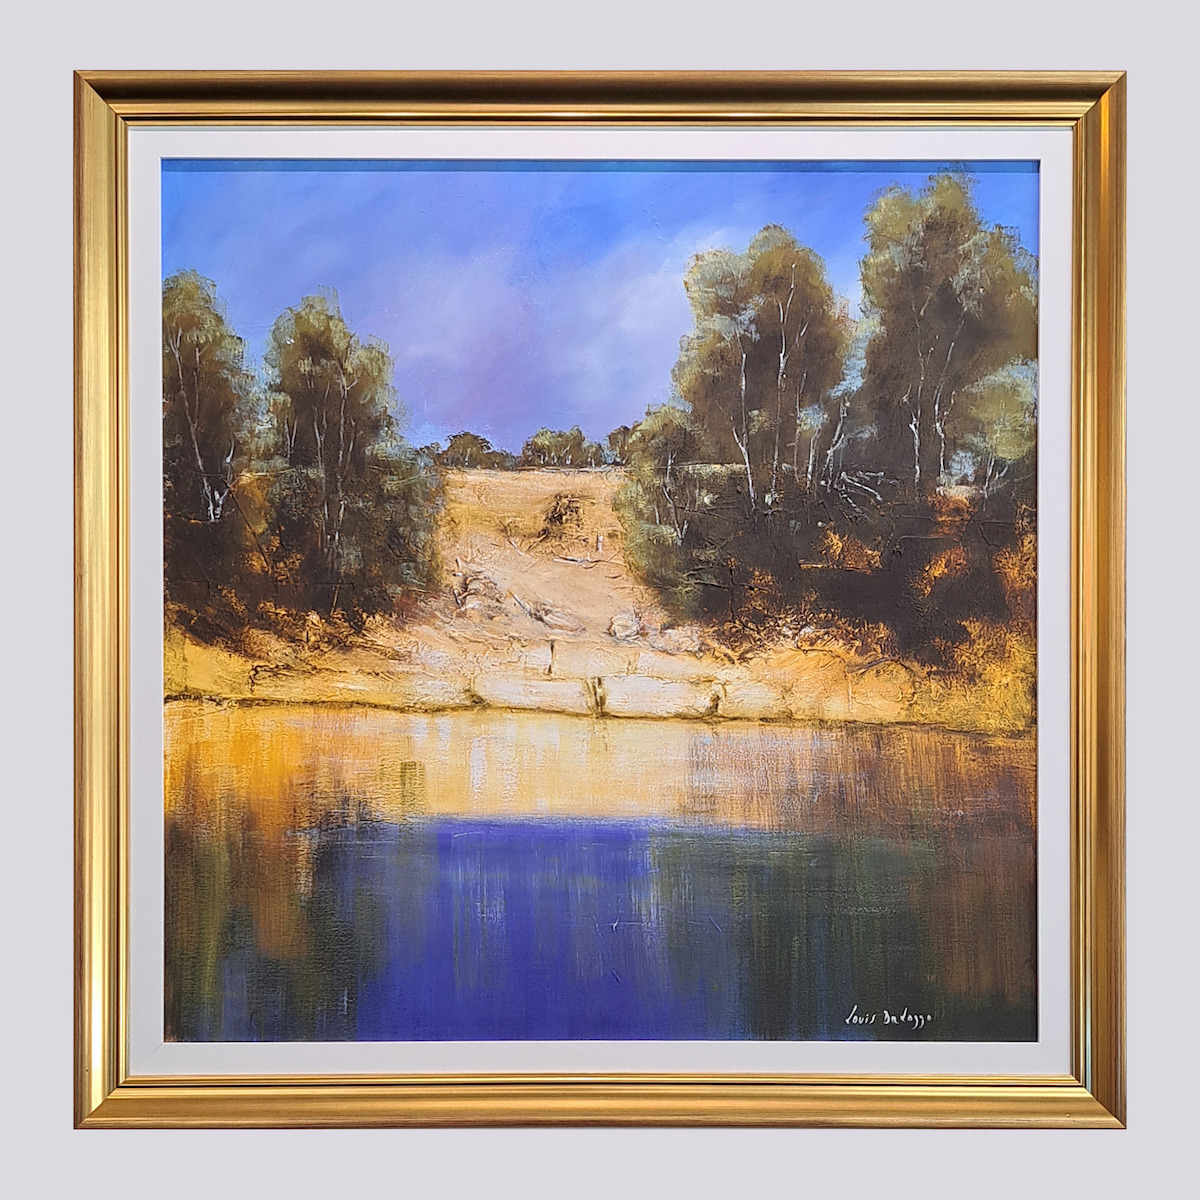 Framed Front View Of Landscape Painting "Reflections in Carnarvon Creek" By Louis Dalozzo